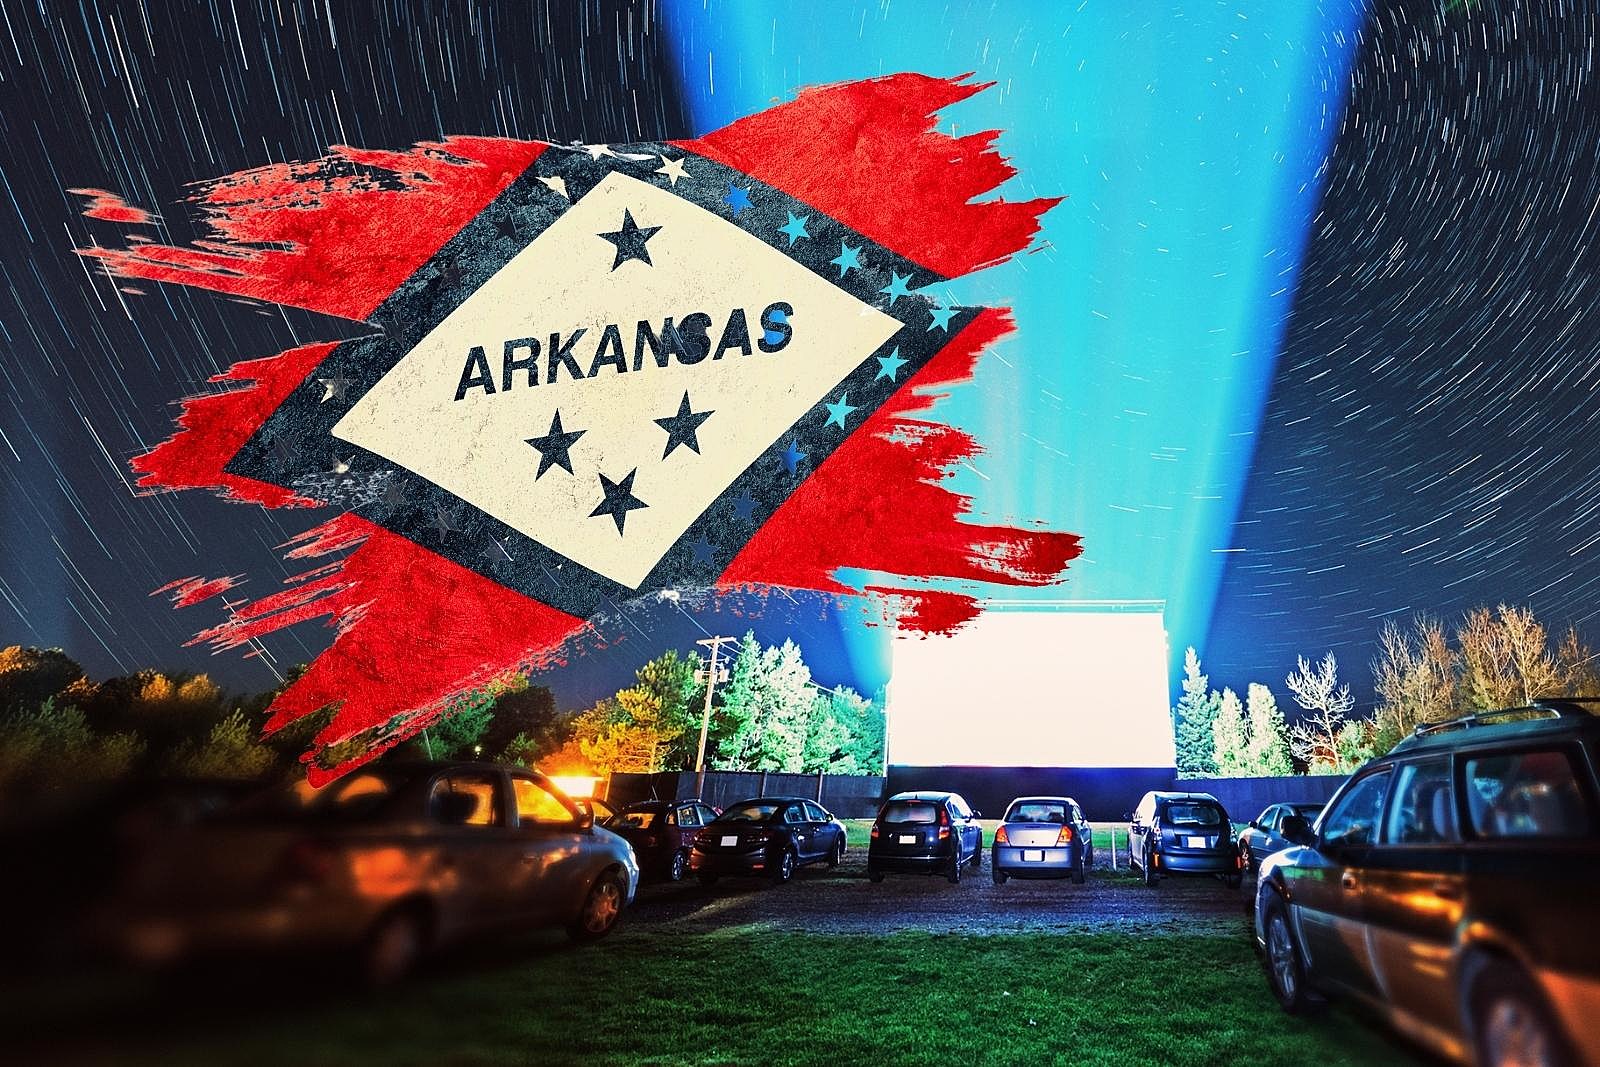 2 Drive-in Movie Theaters in Arkansas Are Still Alive and Kicking